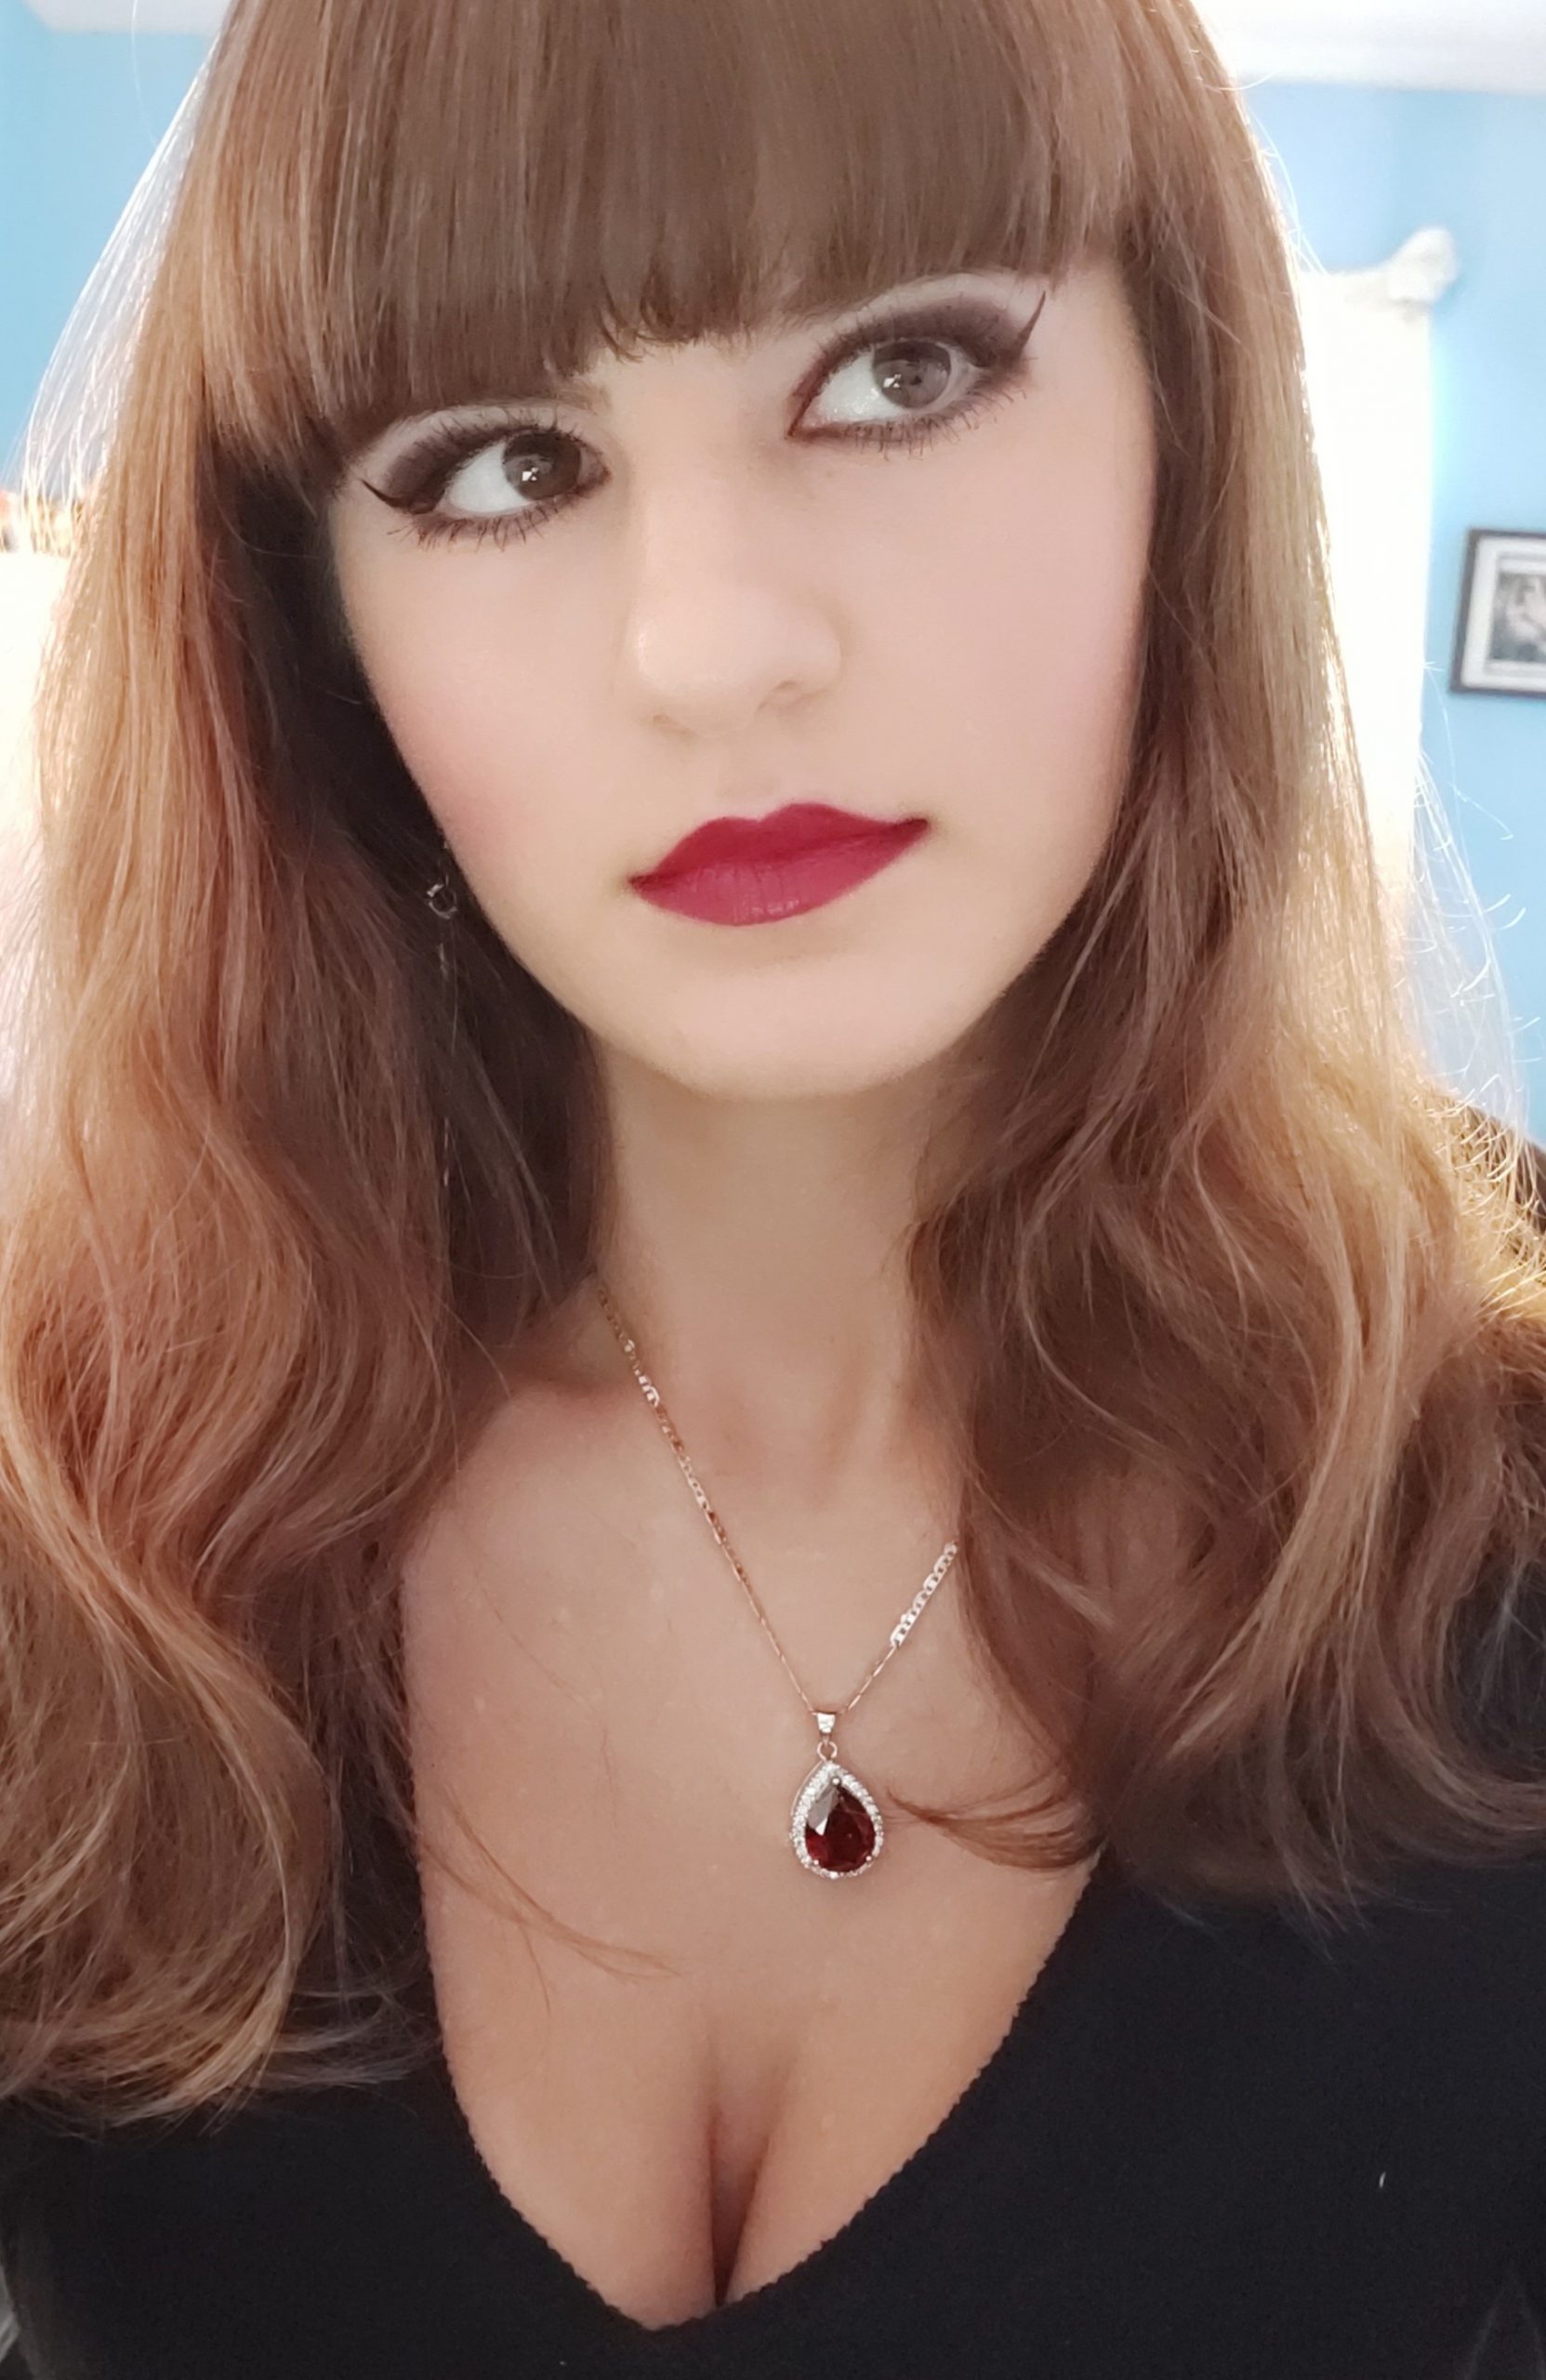 Noelle Brody has long red-brown hair with bold bangs that end just above her eyes, as well as red lipstick, thick eyeliner, a necklace with a red stone and a black top. Her eyes looks off to the right but se is facing the camera directly.